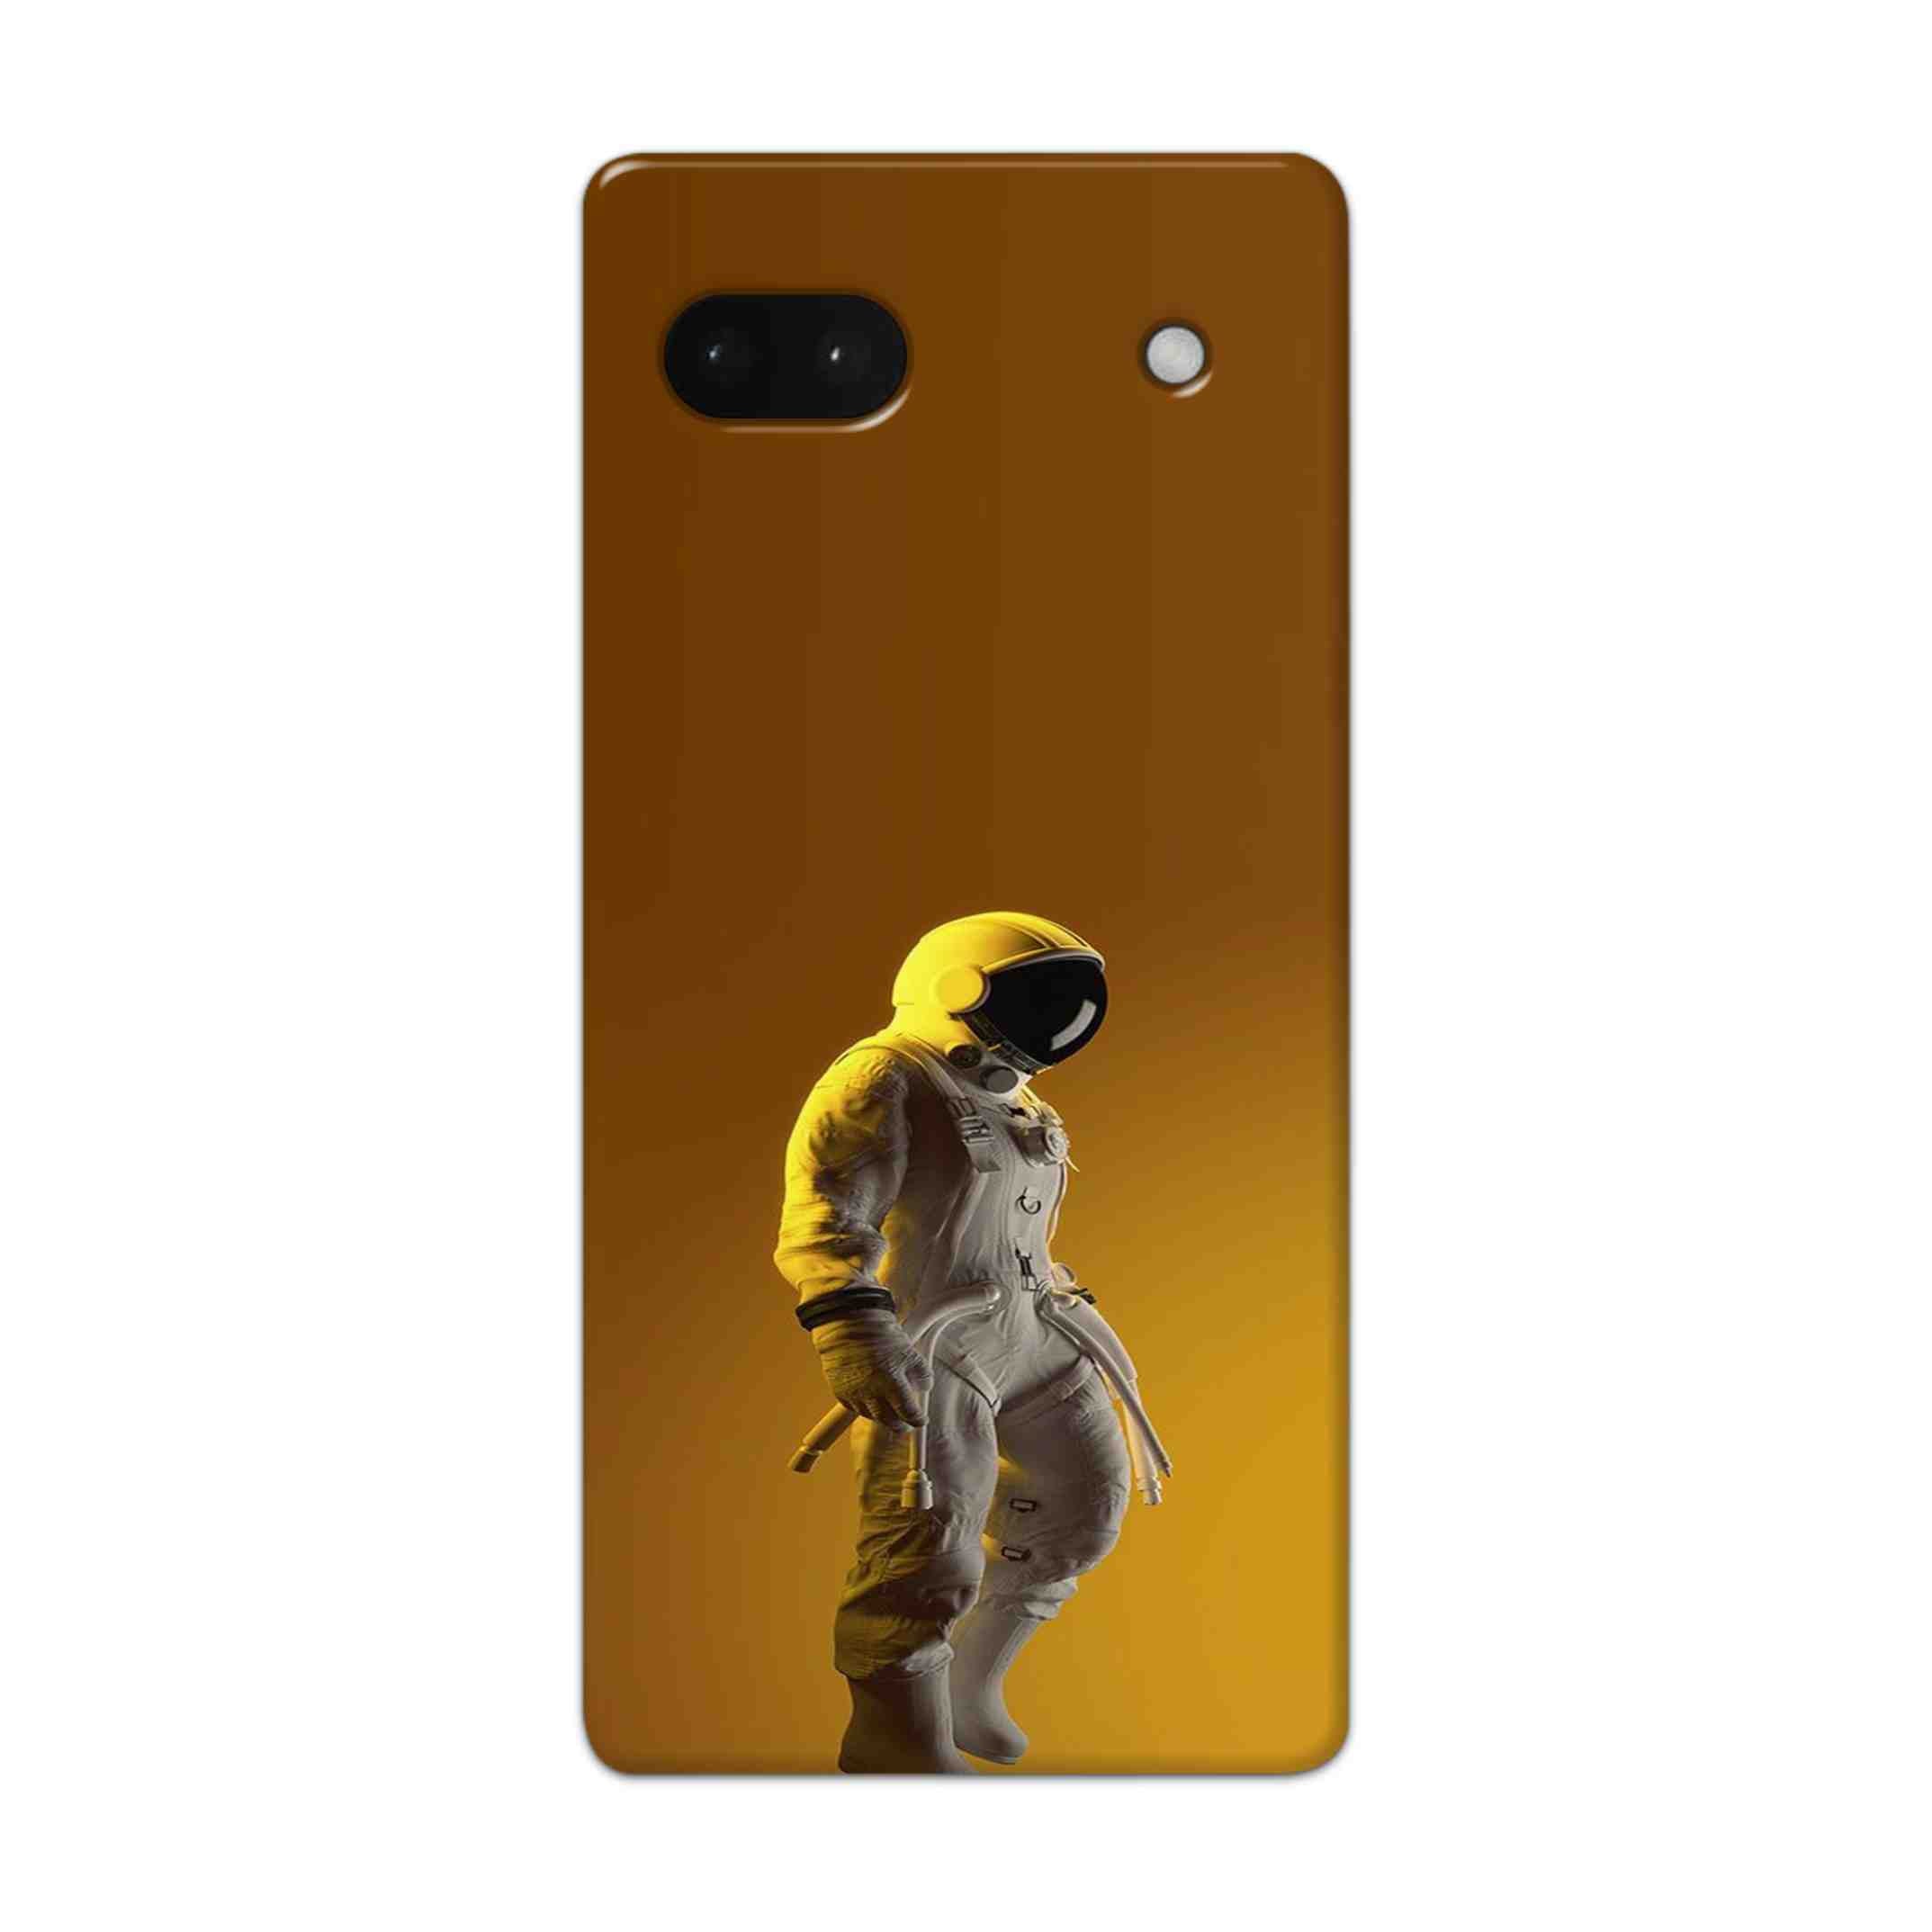 Buy Yellow Astronaut Hard Back Mobile Phone Case Cover For Google Pixel 6a Online